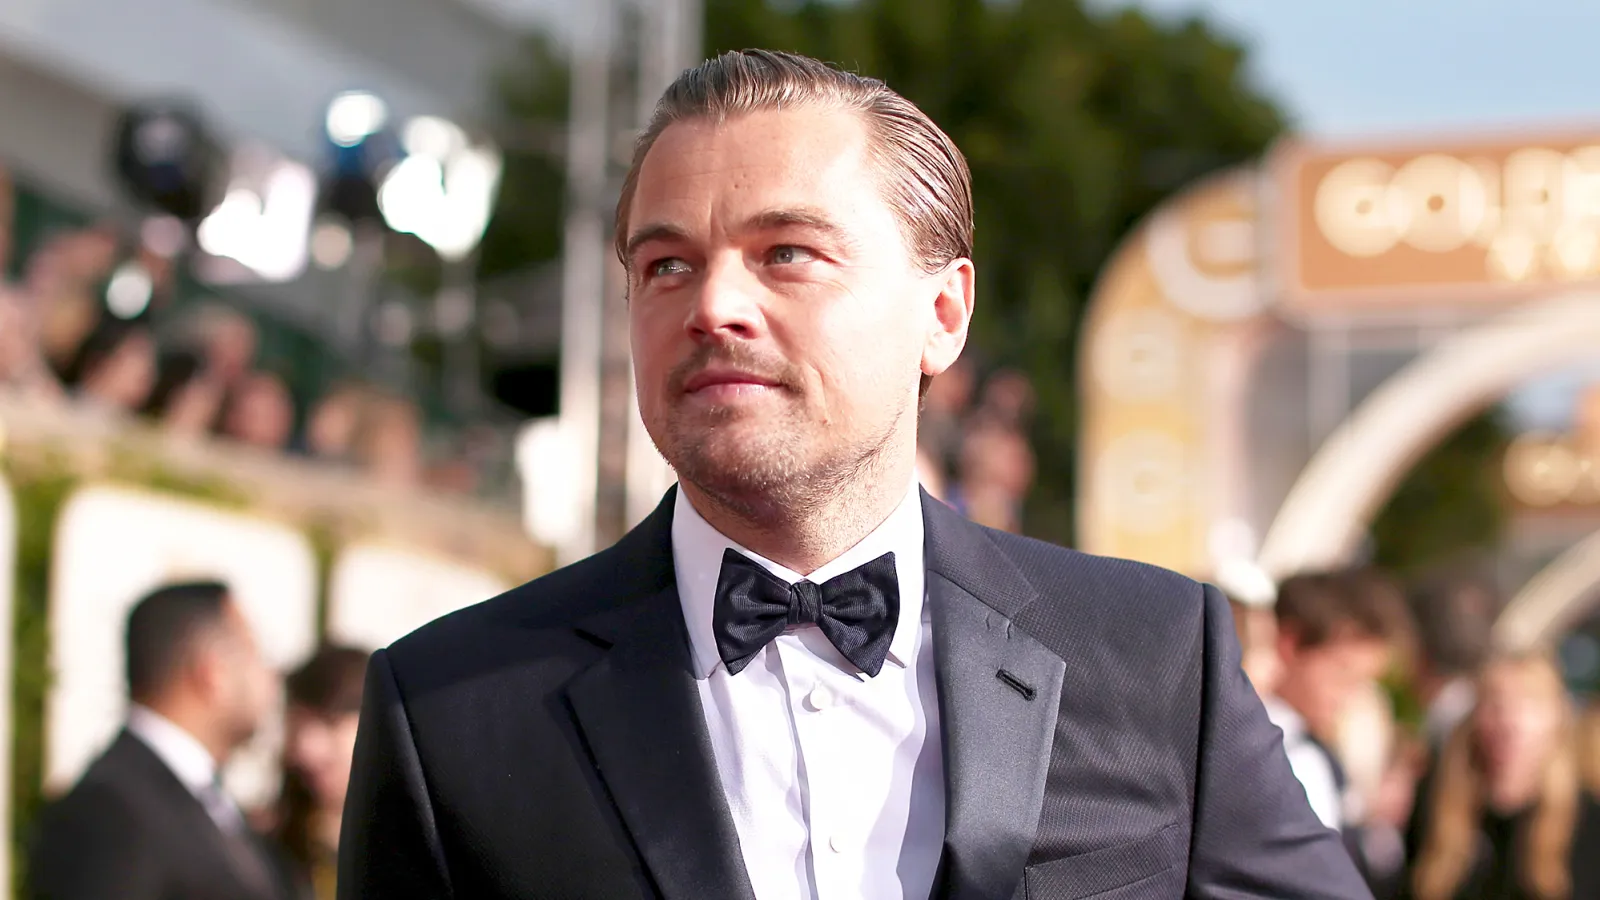 In which movie does Leonardo DiCaprio play a stockbroker involved in fraudulent activities?